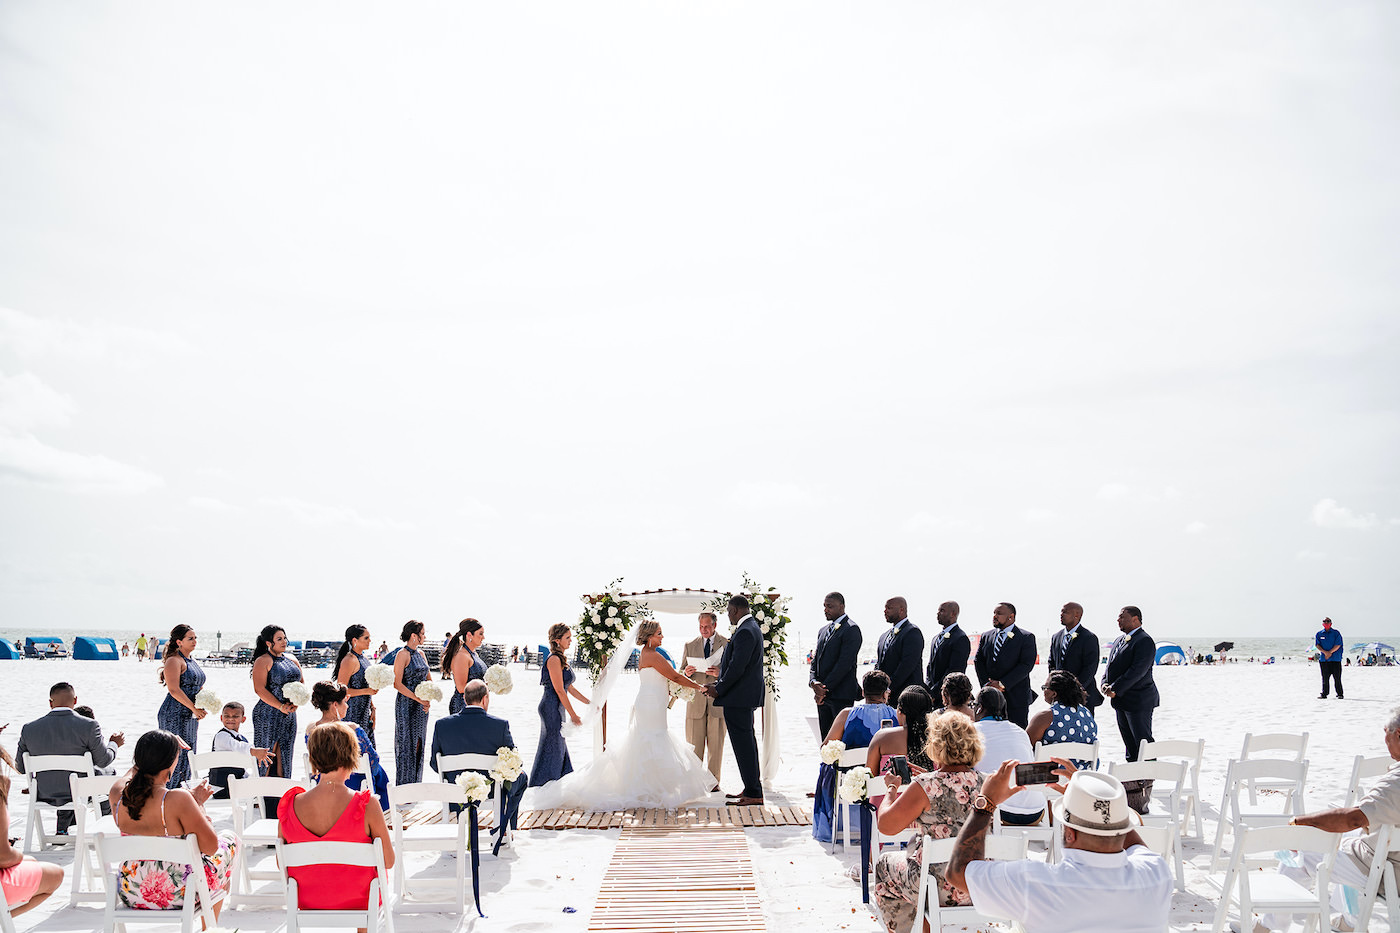 Florida Bride and Groom Exchange Vows in Outdoor Beachfront Ceremony, Tampa Bay Wedding Party with Romantic Tropical Ceremony Decor, White Roses and Greenery | Tampa Bay Hotel and Wedding Venue Hilton Clearwater Beach